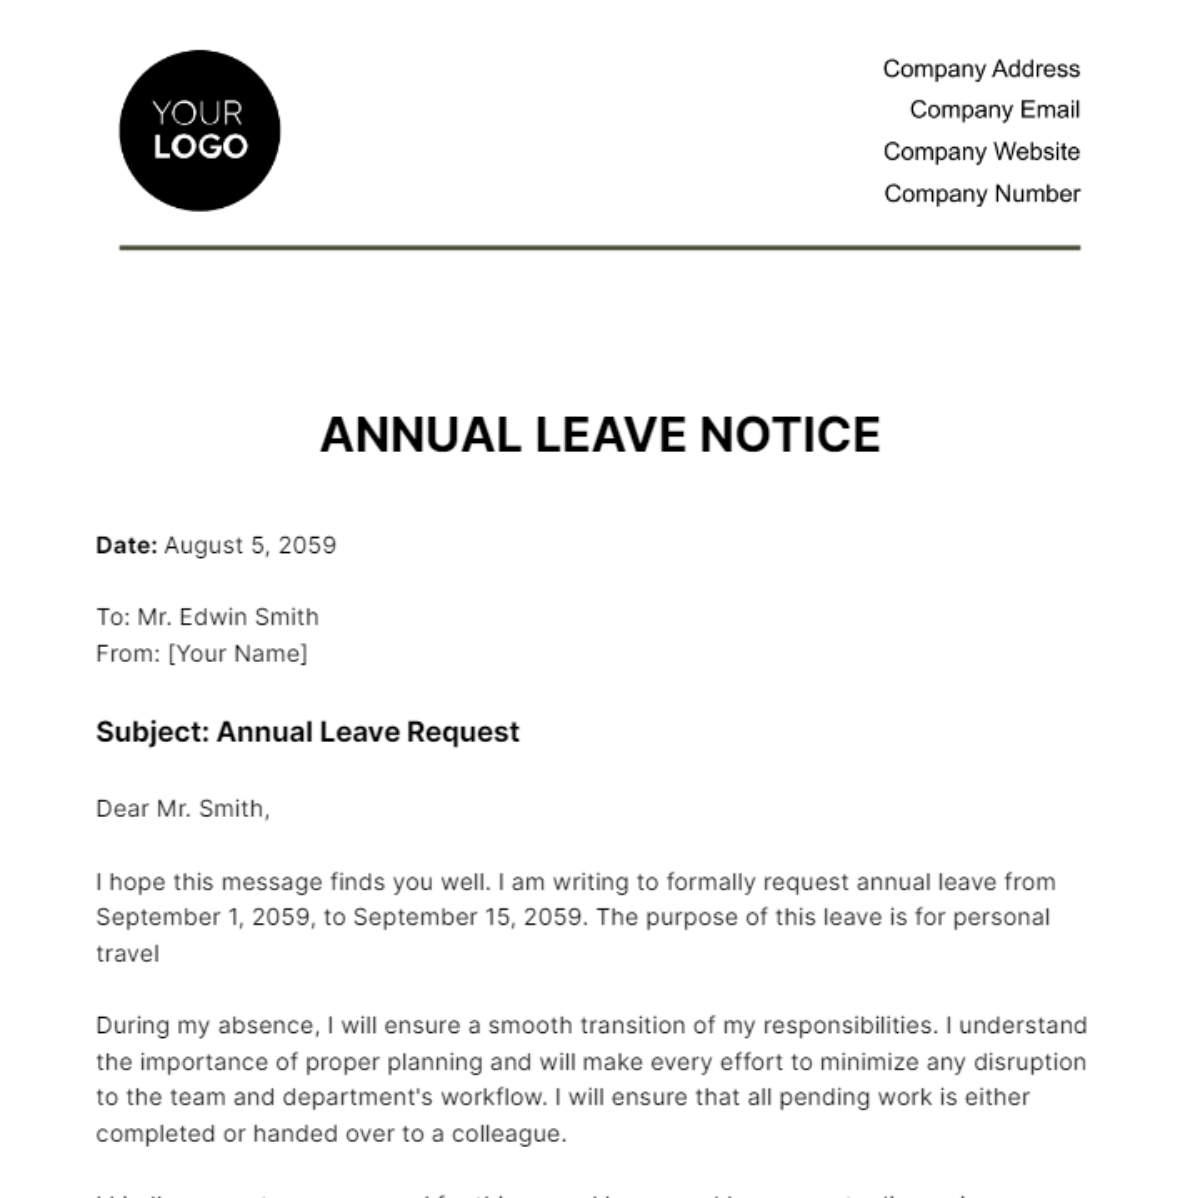 Annual Leave Notice HR Template